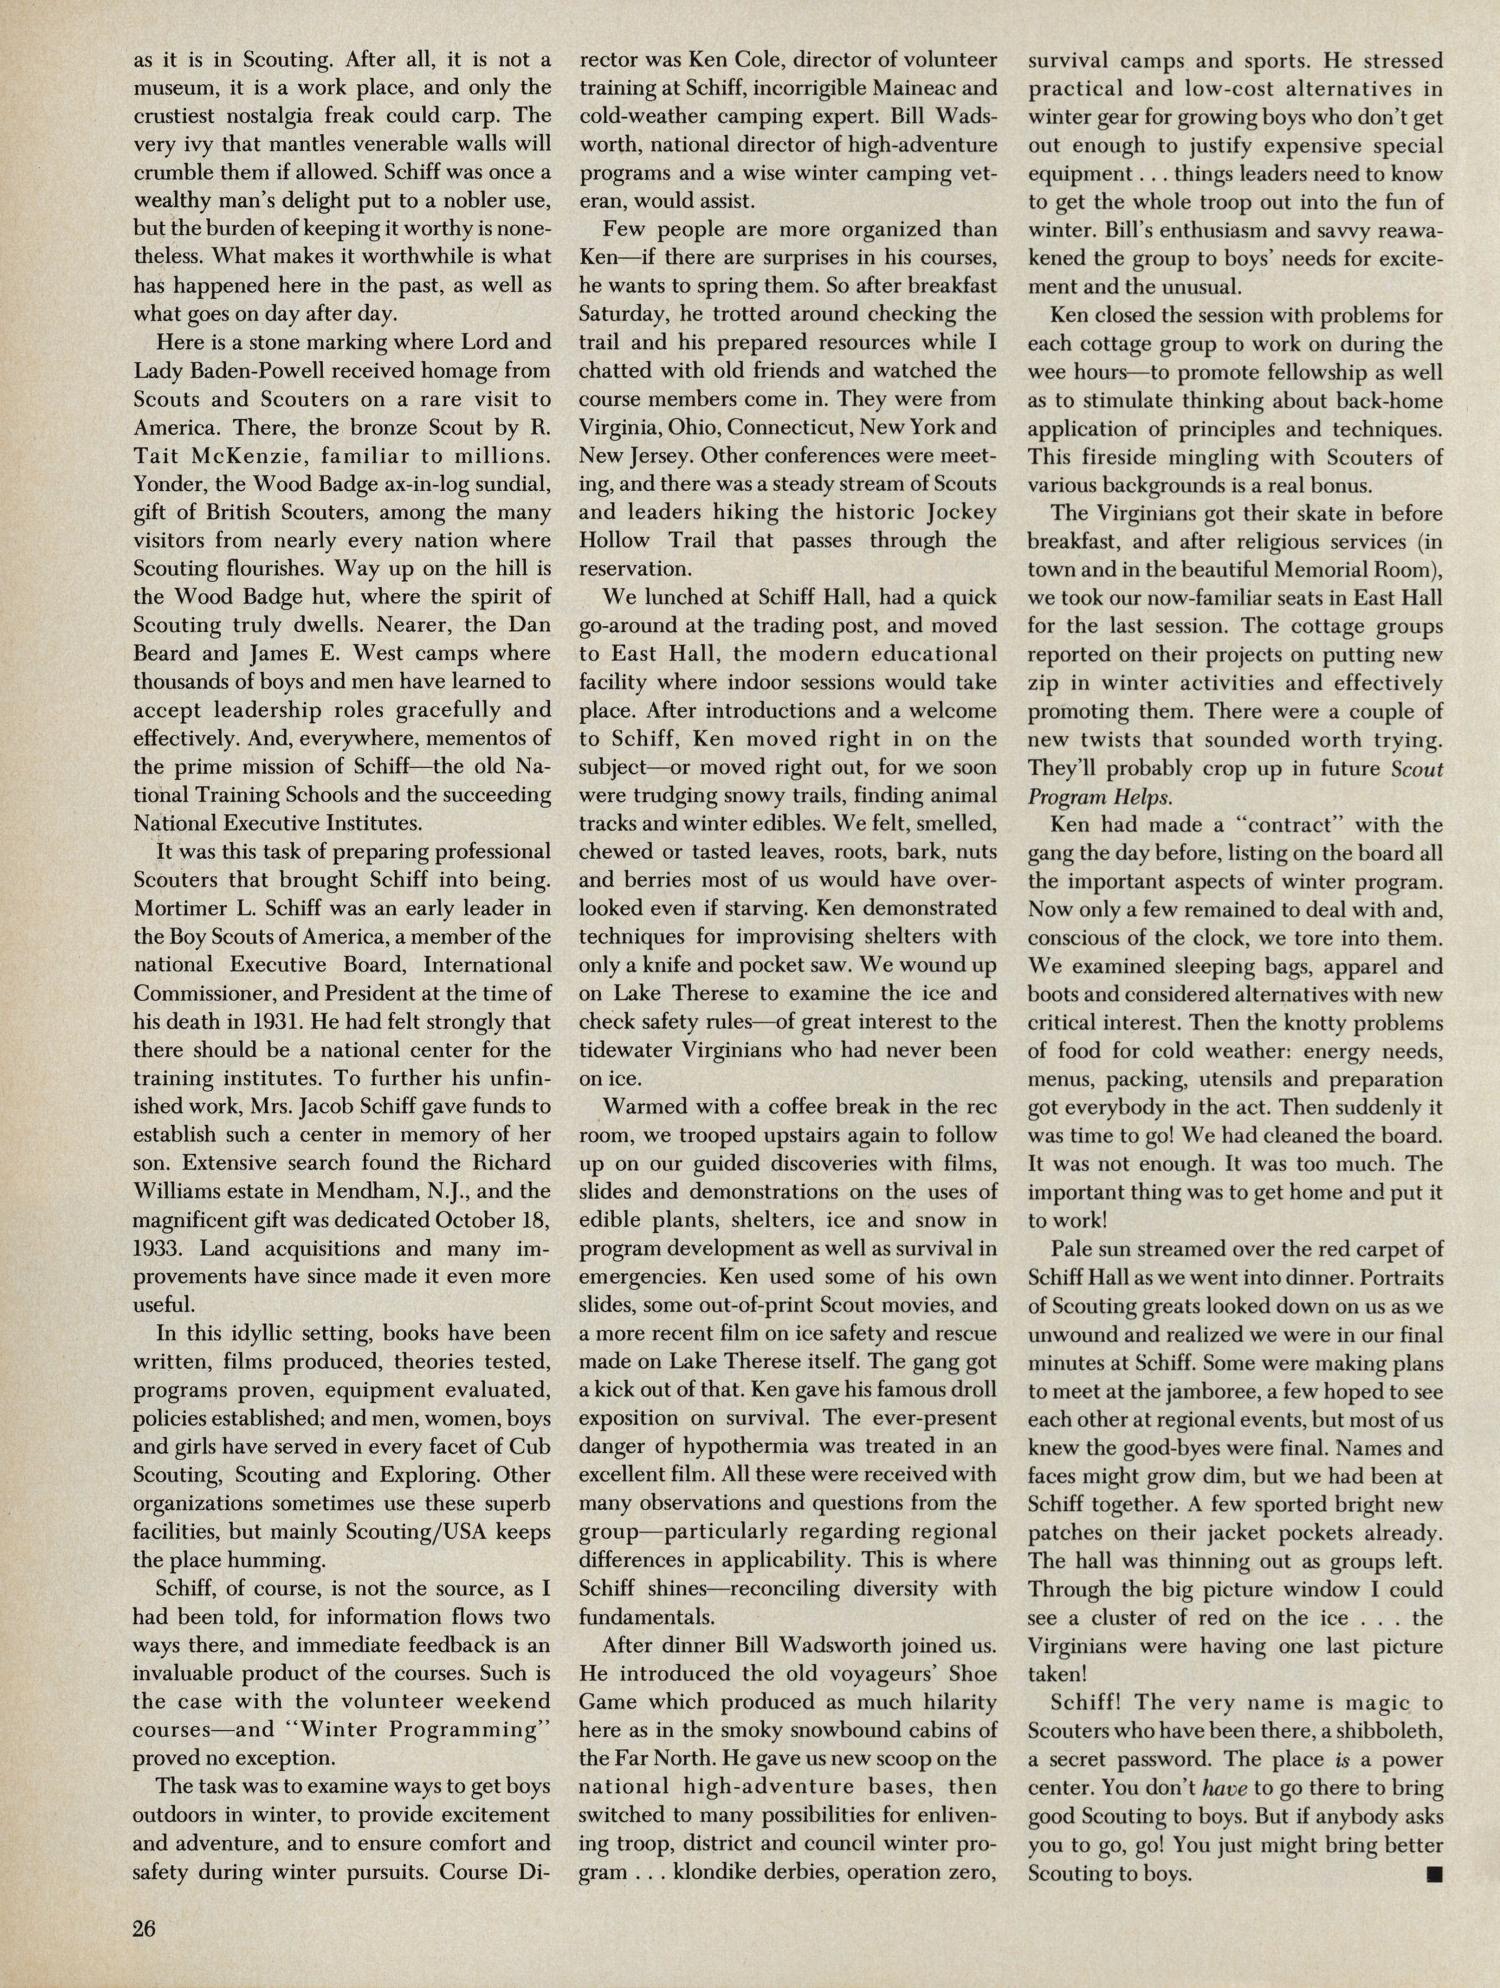 Scouting, Volume 65, Number 3, May-June 1977
                                                
                                                    26
                                                